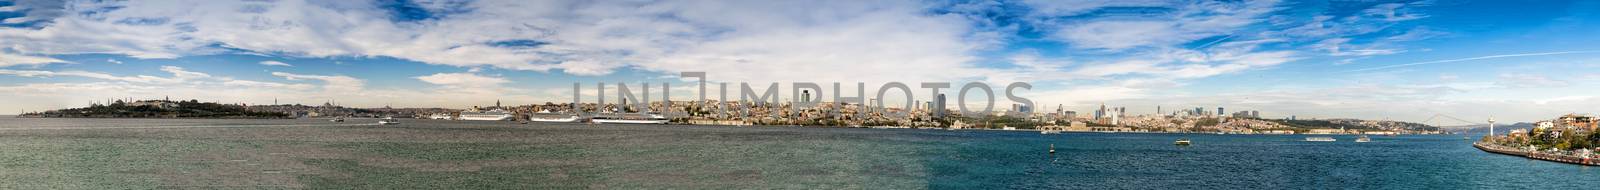 Complete panoramic view of Istanbul from Maiden's Tower.